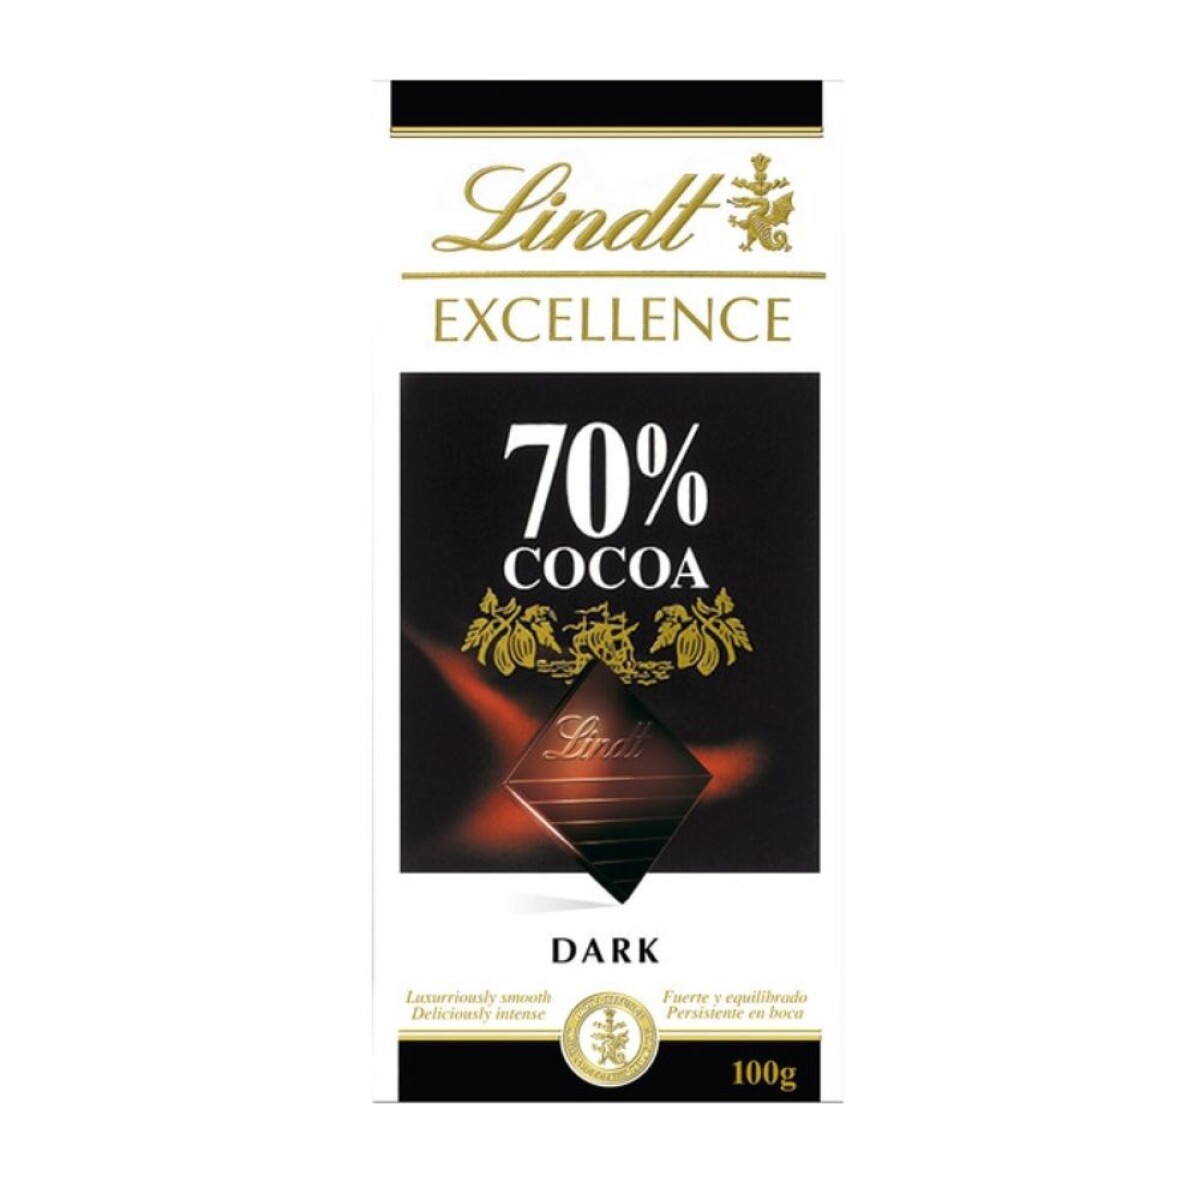 Chocolate Intense Dark 70% Cacao Lindt Excellence 100g 